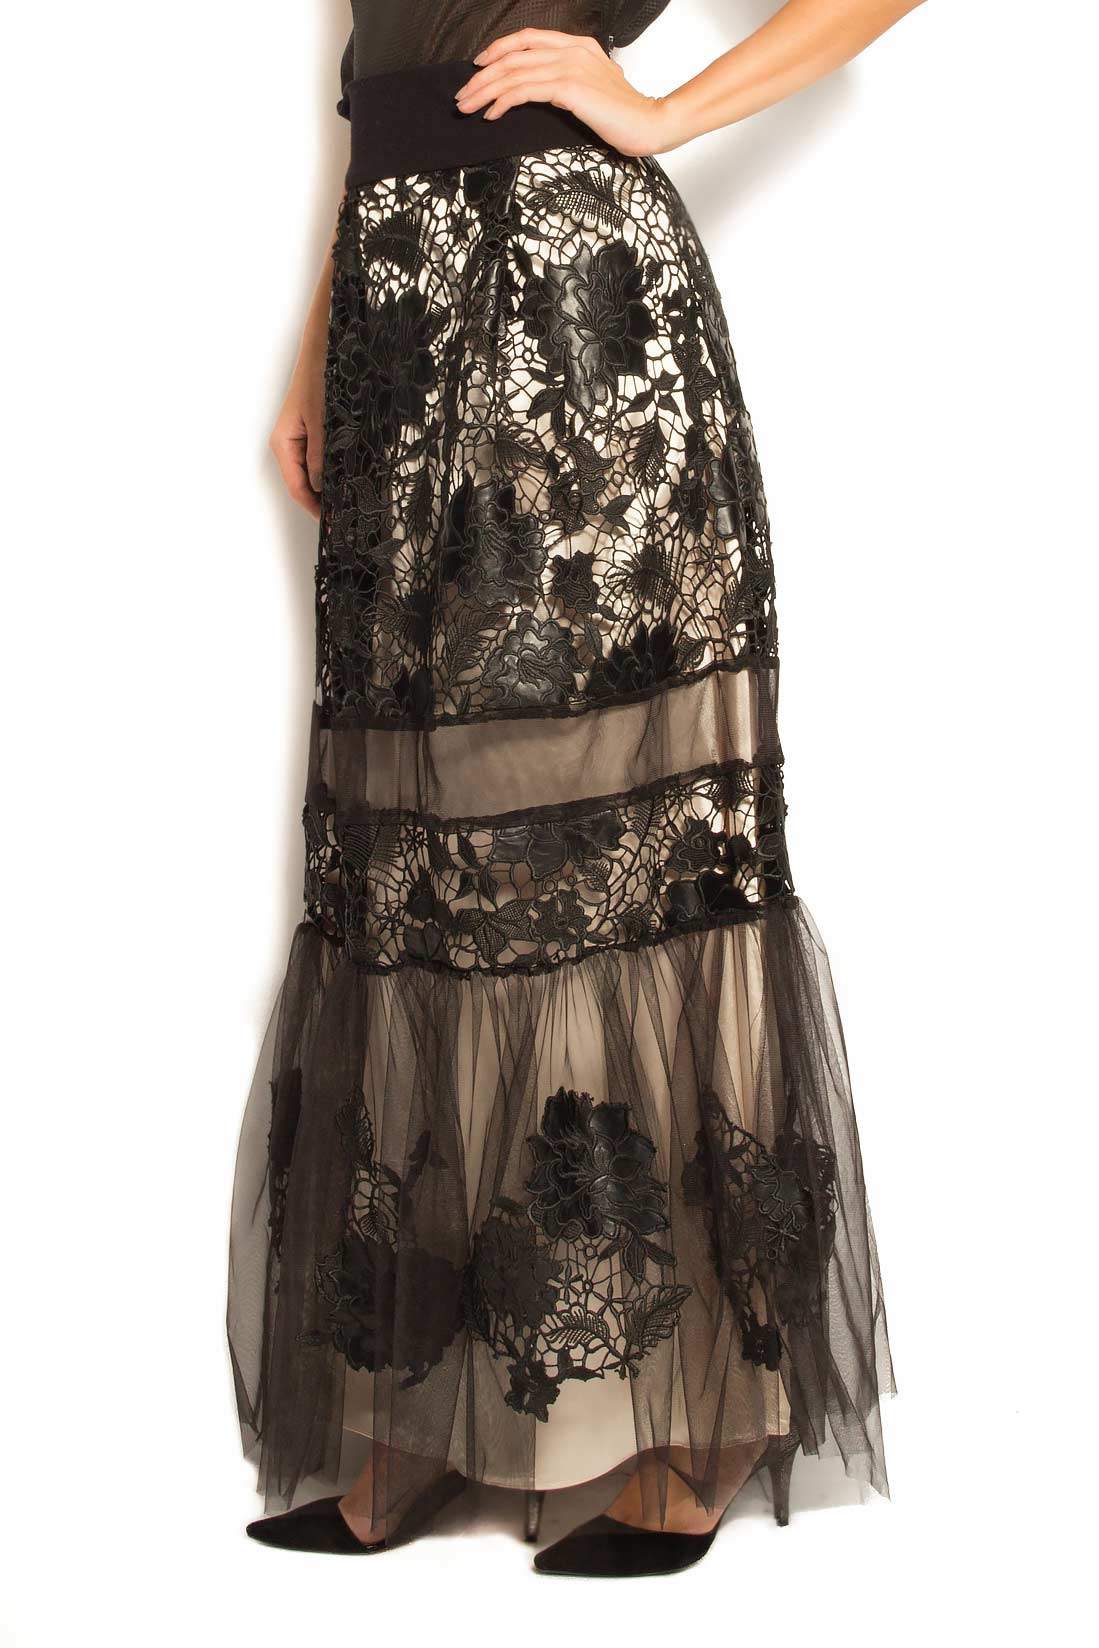 Tulle maxi skirt decorated with leather embroidery Elena Perseil image 1